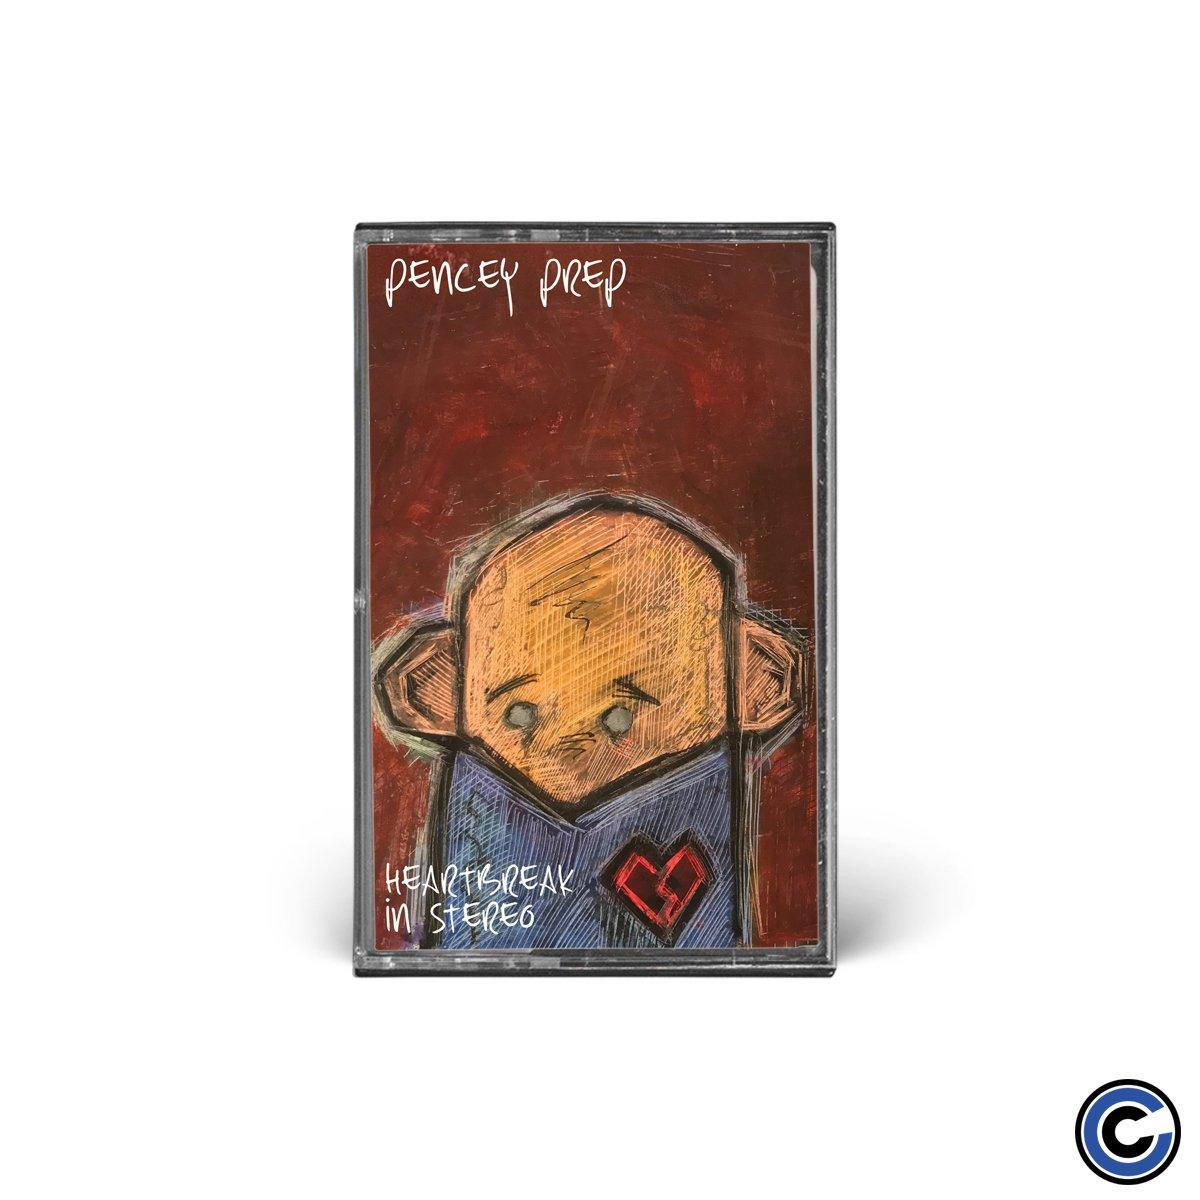 Buy – Pencey Prep "Heartbreak In Stereo" Cassette – Band & Music Merch – Cold Cuts Merch